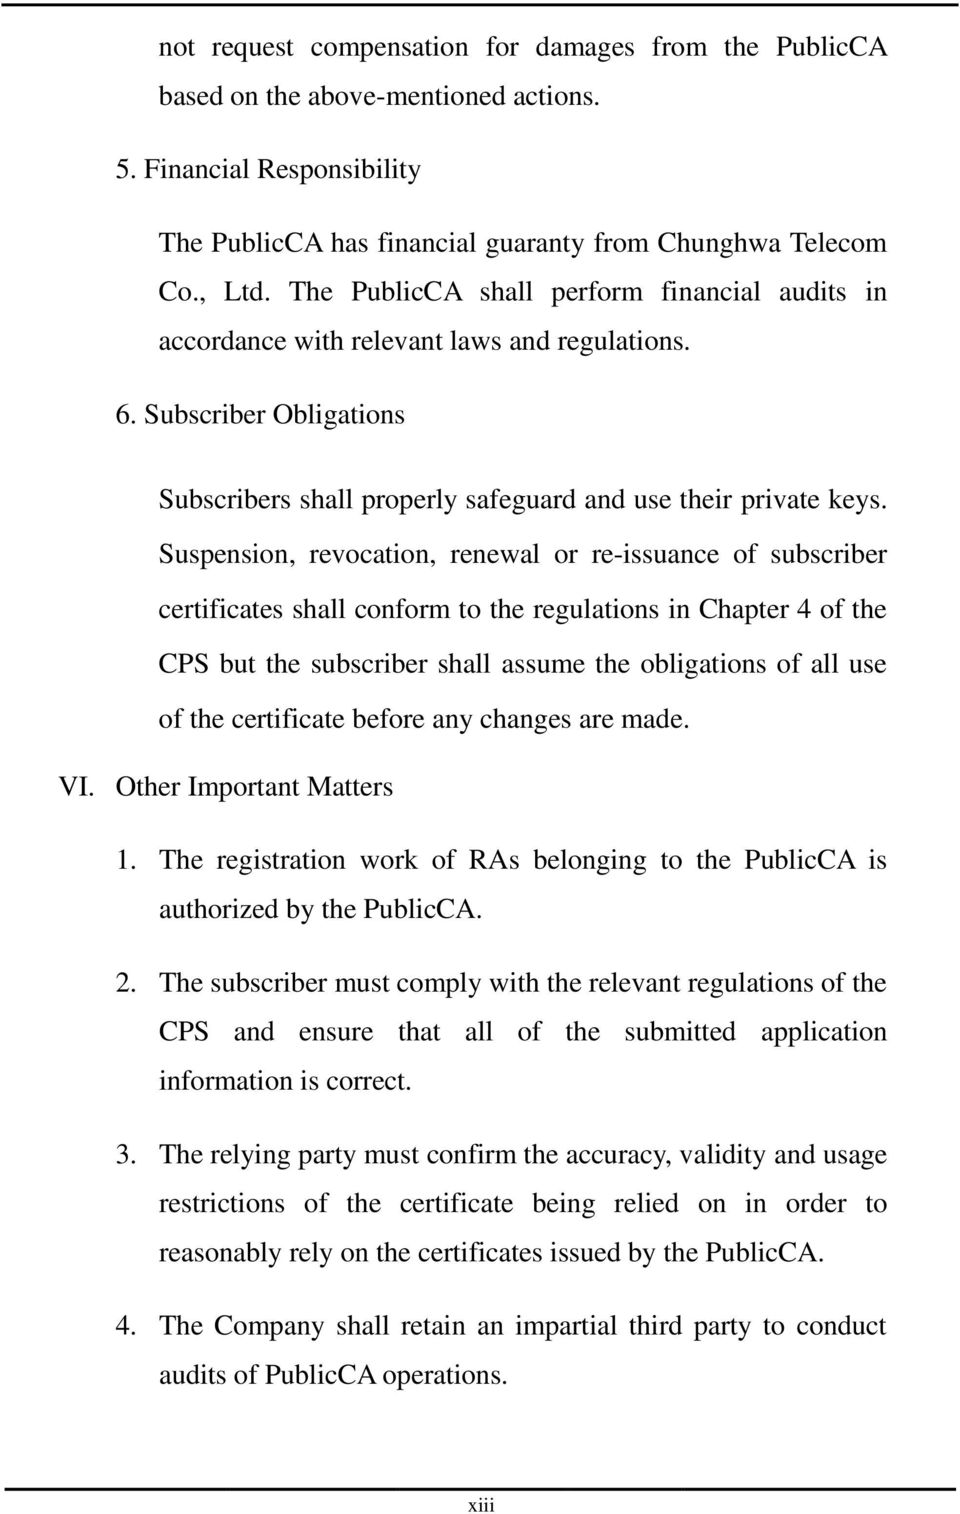 Suspension, revocation, renewal or re-issuance of subscriber certificates shall conform to the regulations in Chapter 4 of the CPS but the subscriber shall assume the obligations of all use of the